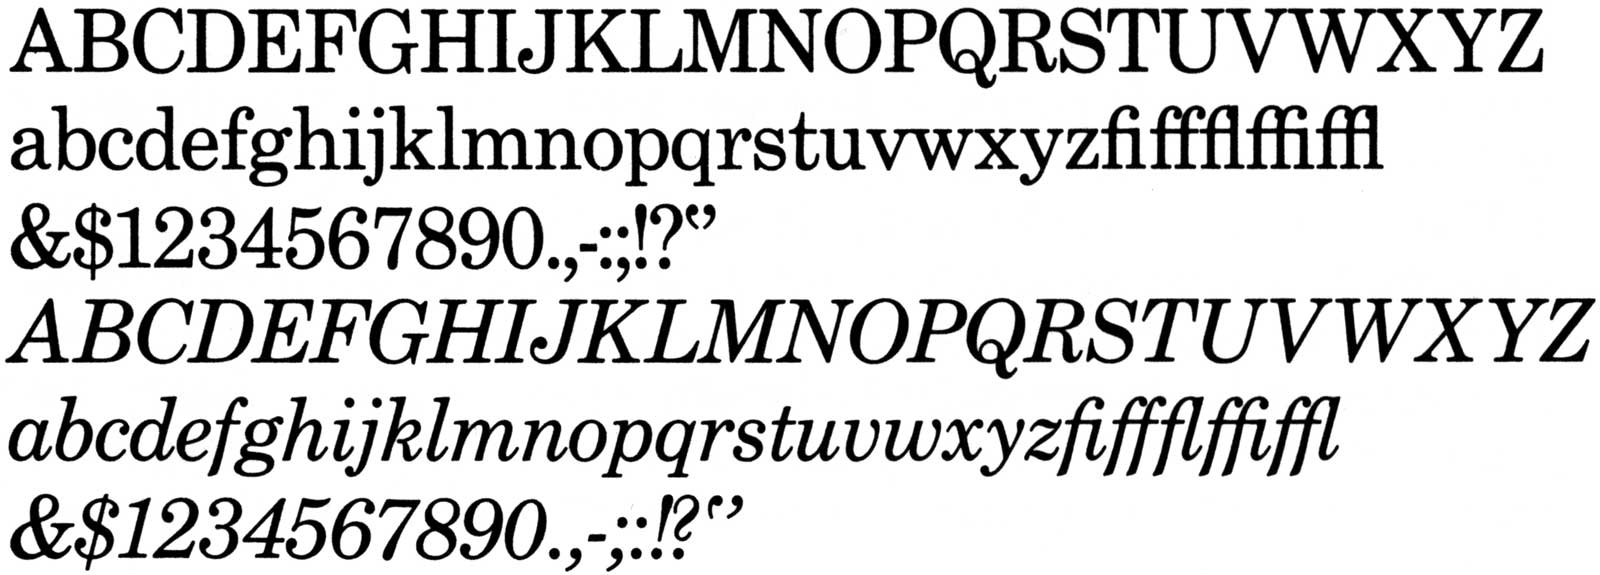 Font samples showing basic character sets of Century Schoolbook and Italic